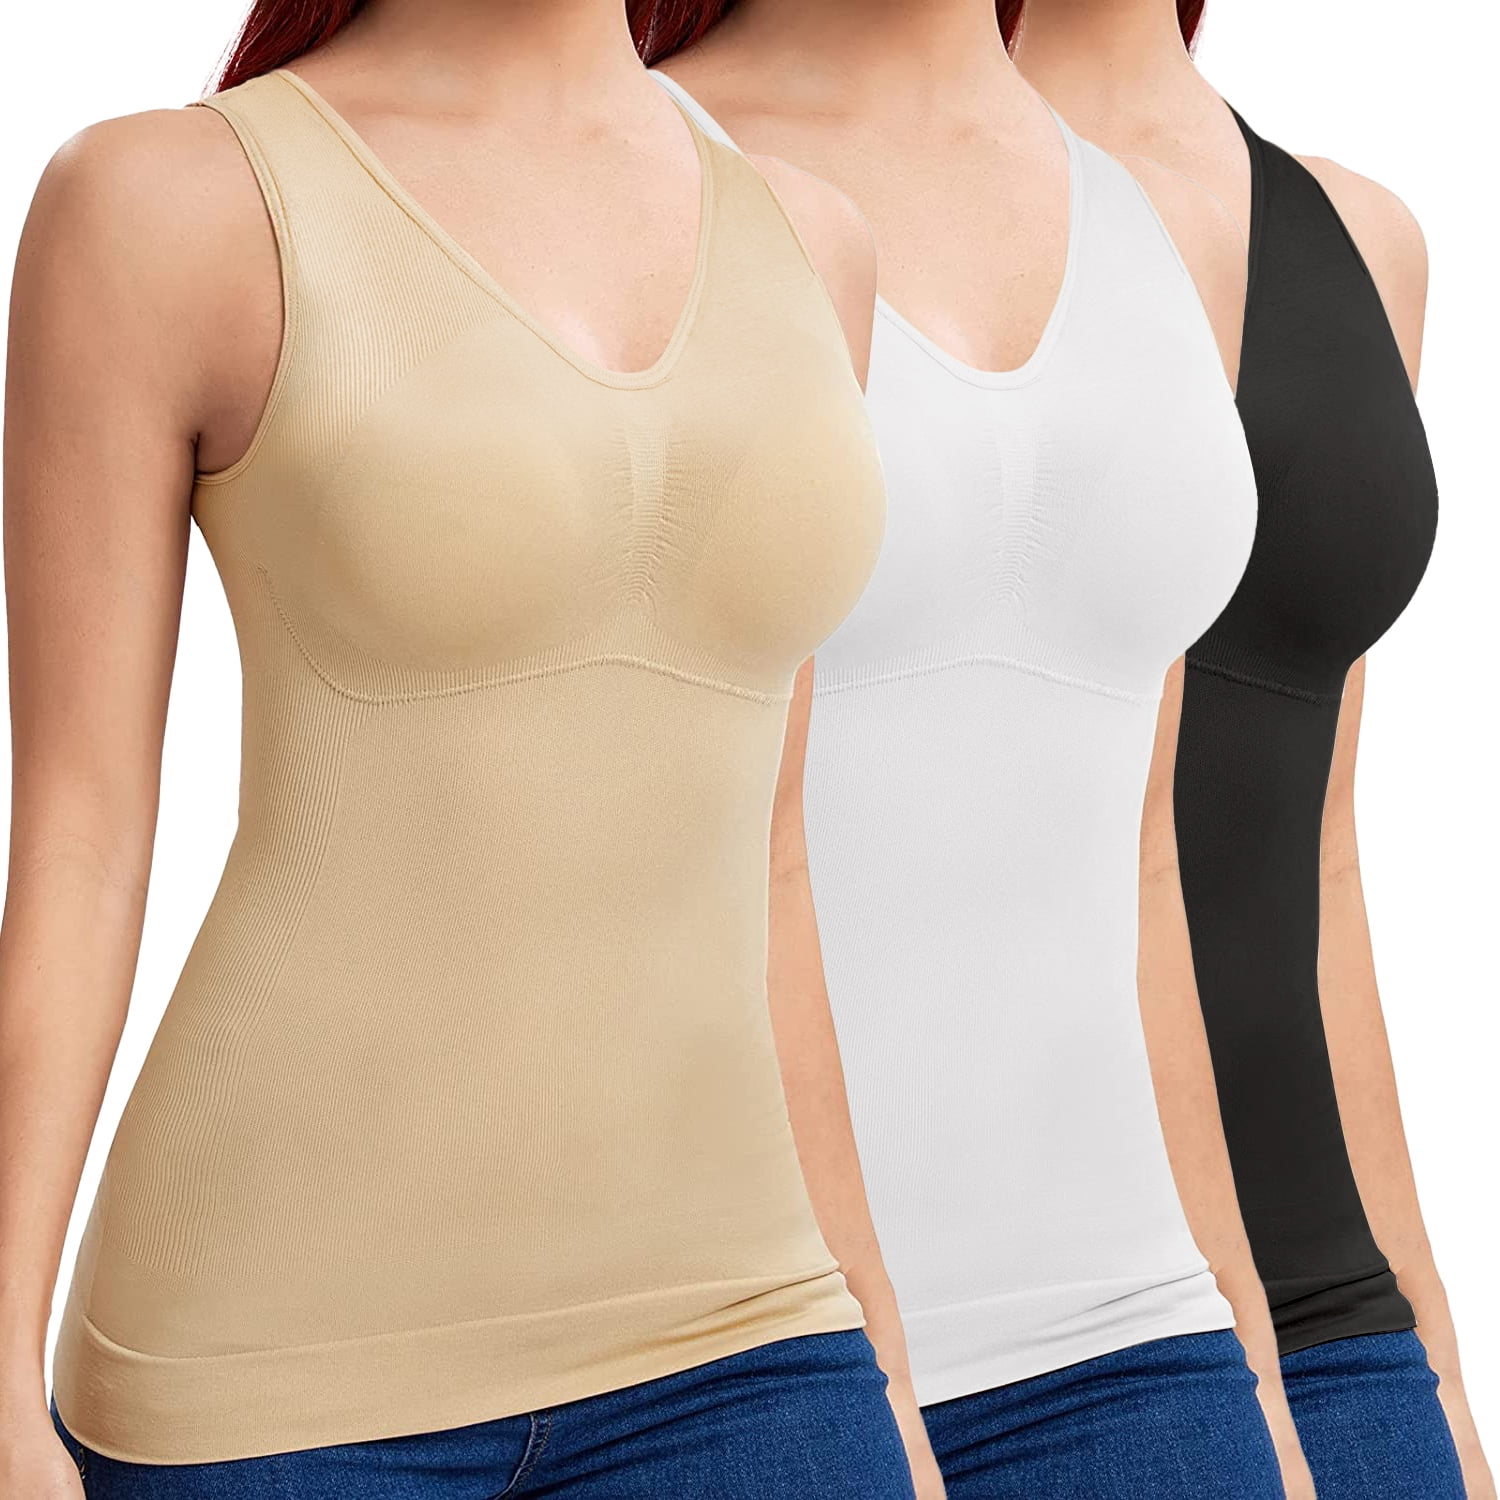 Comfree 3 Pack Womens Shapewear Tank Tops With Built In Bra Tummy Control Cami Shaper